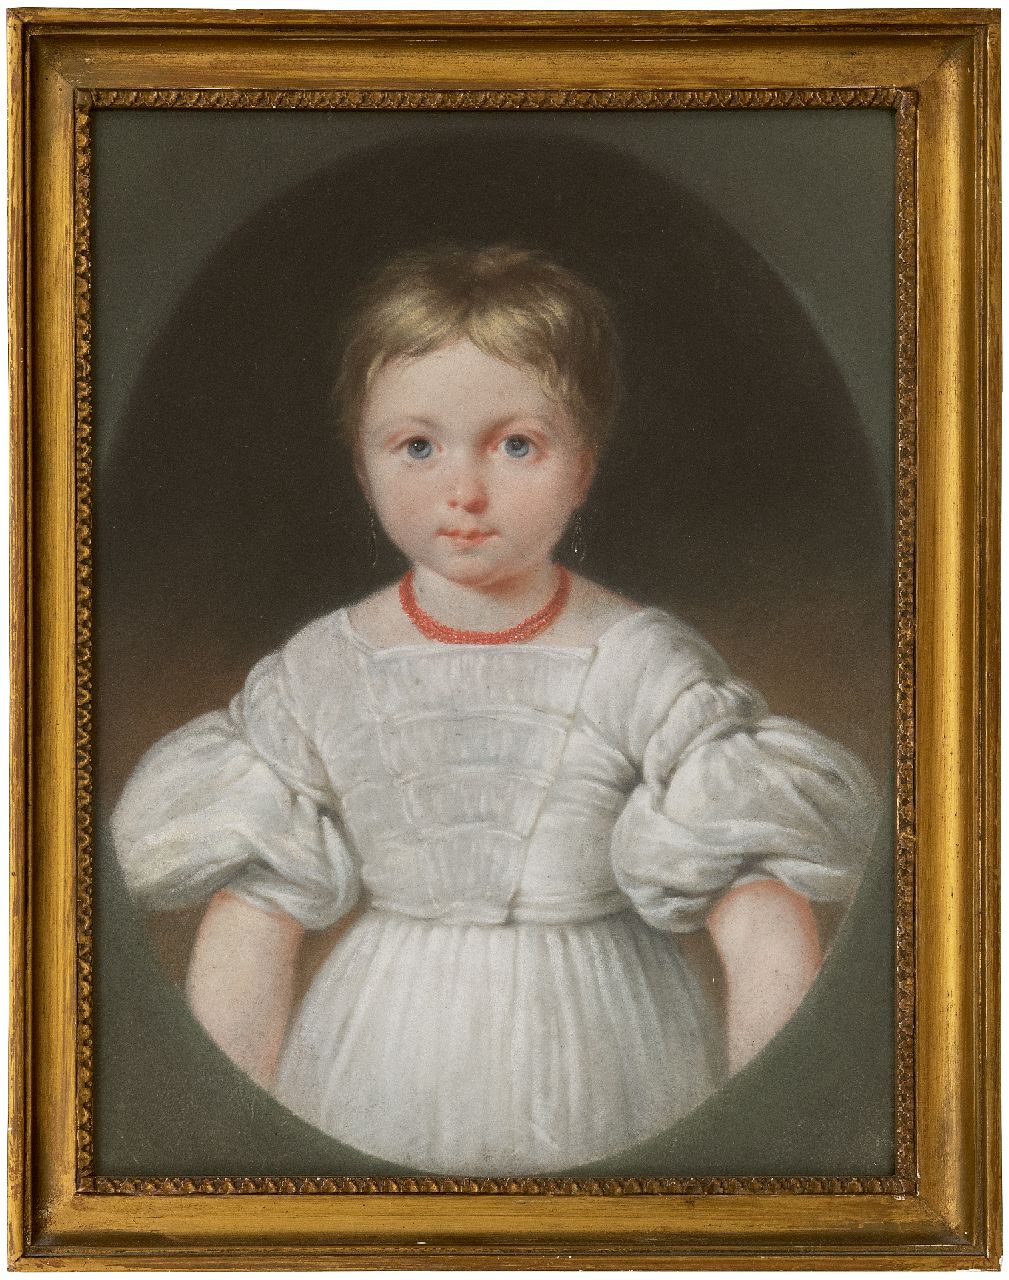 Daiwaille J.A.  | Jean Augustin Daiwaille | Watercolours and drawings offered for sale | Portrait of a girl in a white dress, presumably  Henriette Louise Engelman (1 from 4 portraits), pastel on paper 31.5 x 24.3 cm